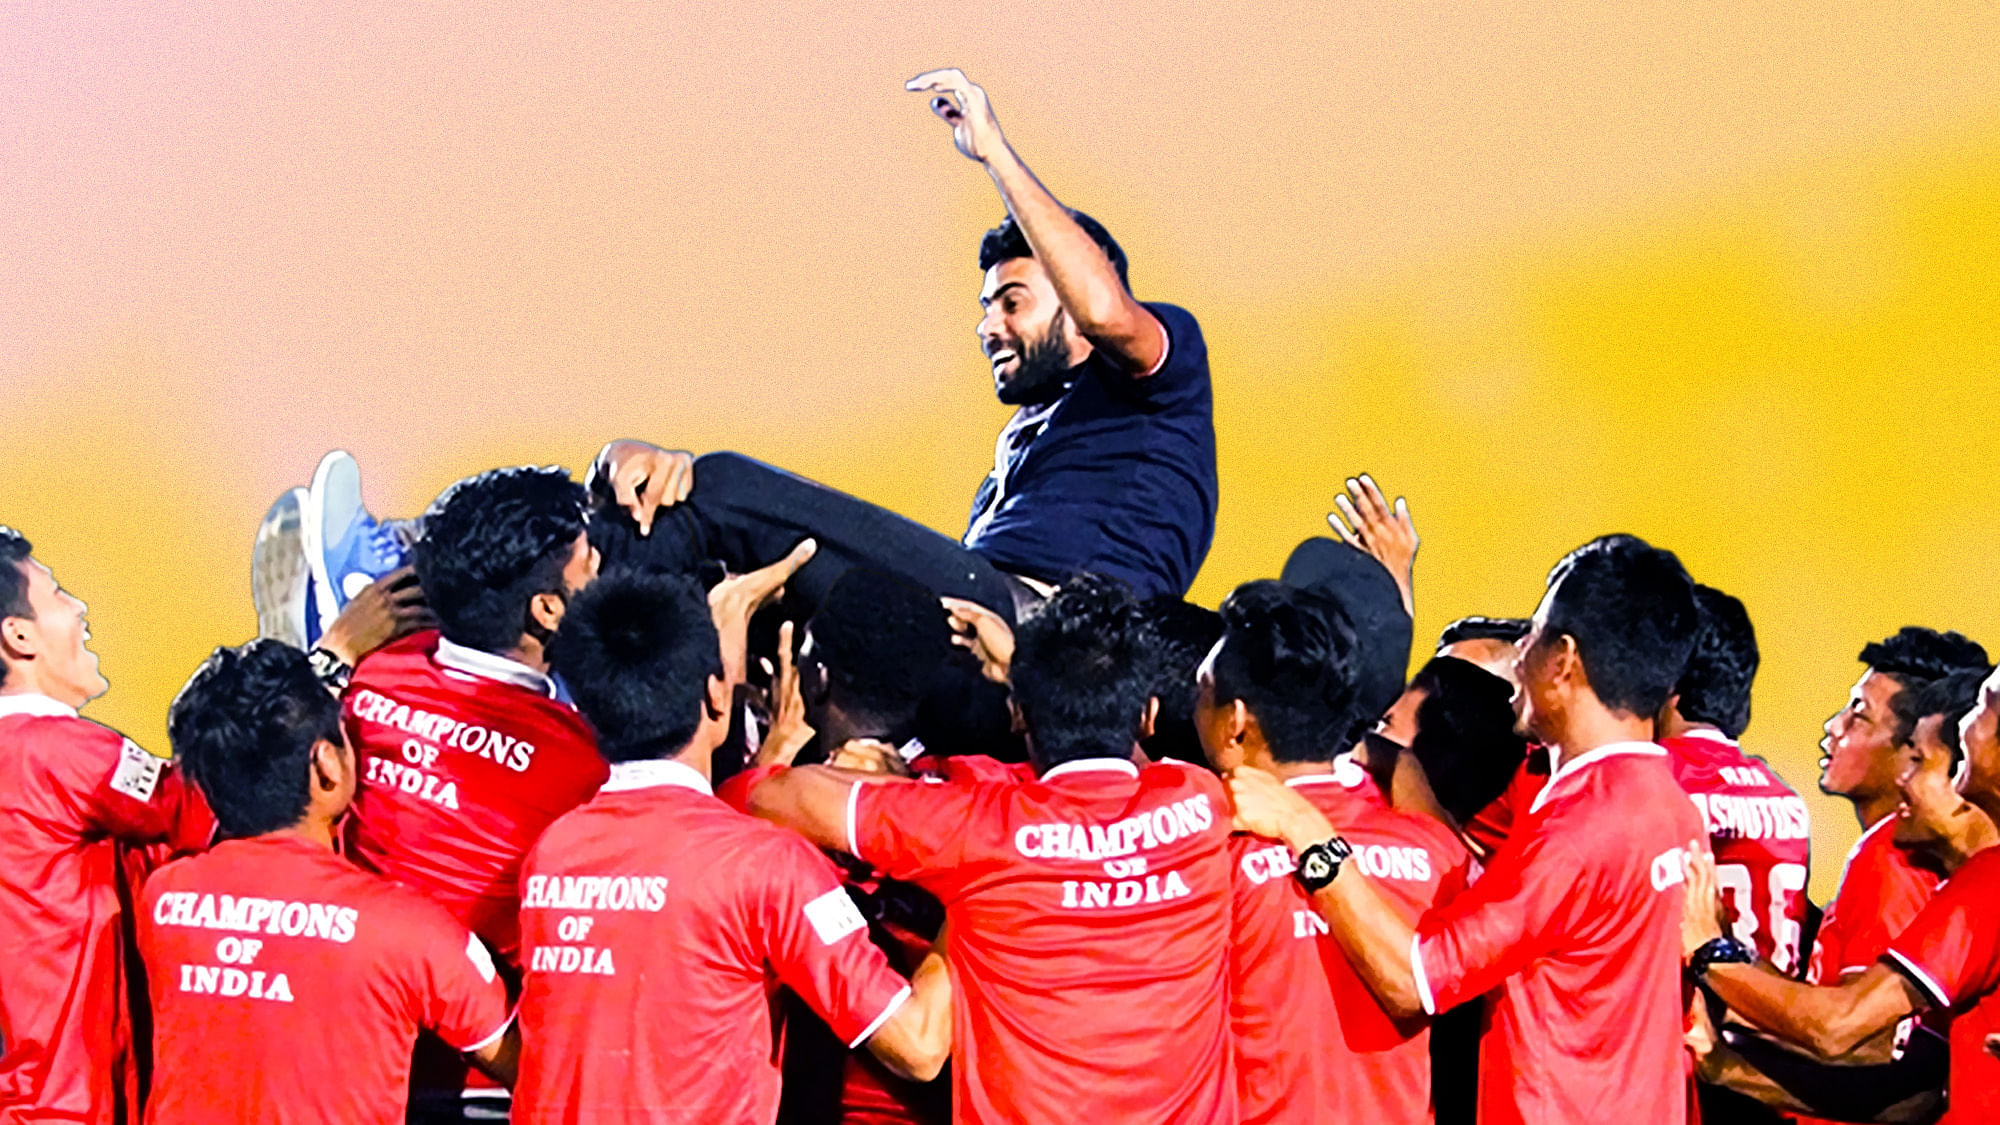 As Aizwal FC celebrated the win, one man watched from the sidelines. Just a year after being thrown out of a club, Khalid Jamil was back up on top. (Photo: Lal Zarzova/Altered by <b>The Quint</b>)